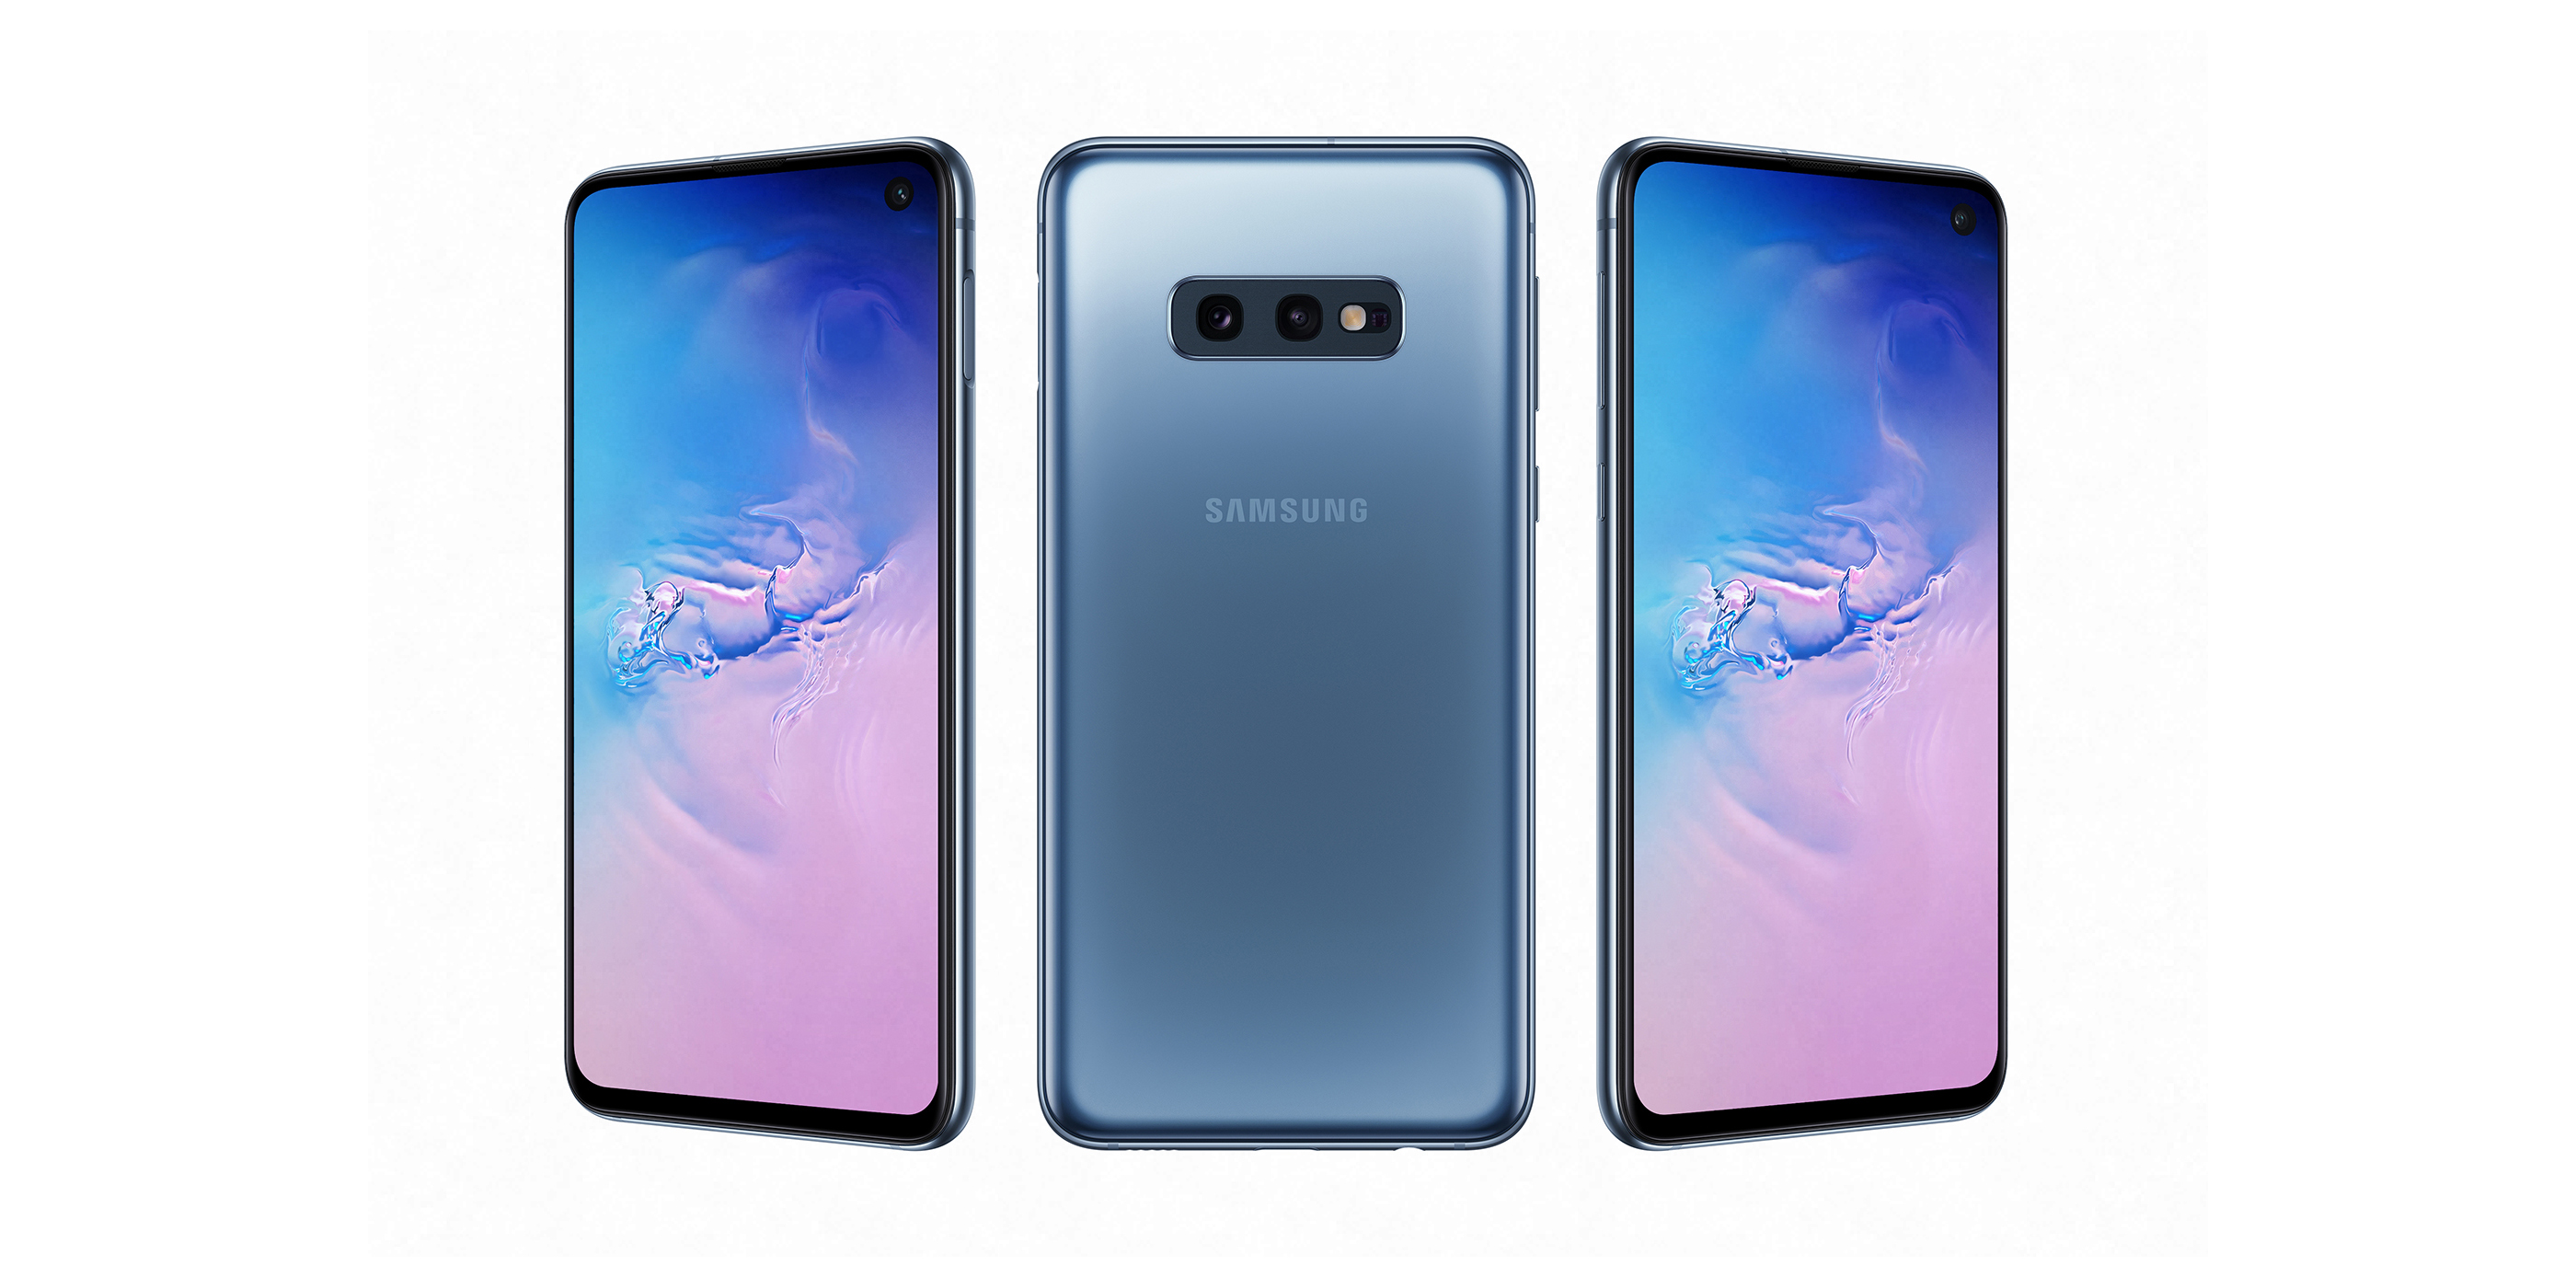 Download the official Samsung Galaxy S10 wallpapers here - 9to5Google